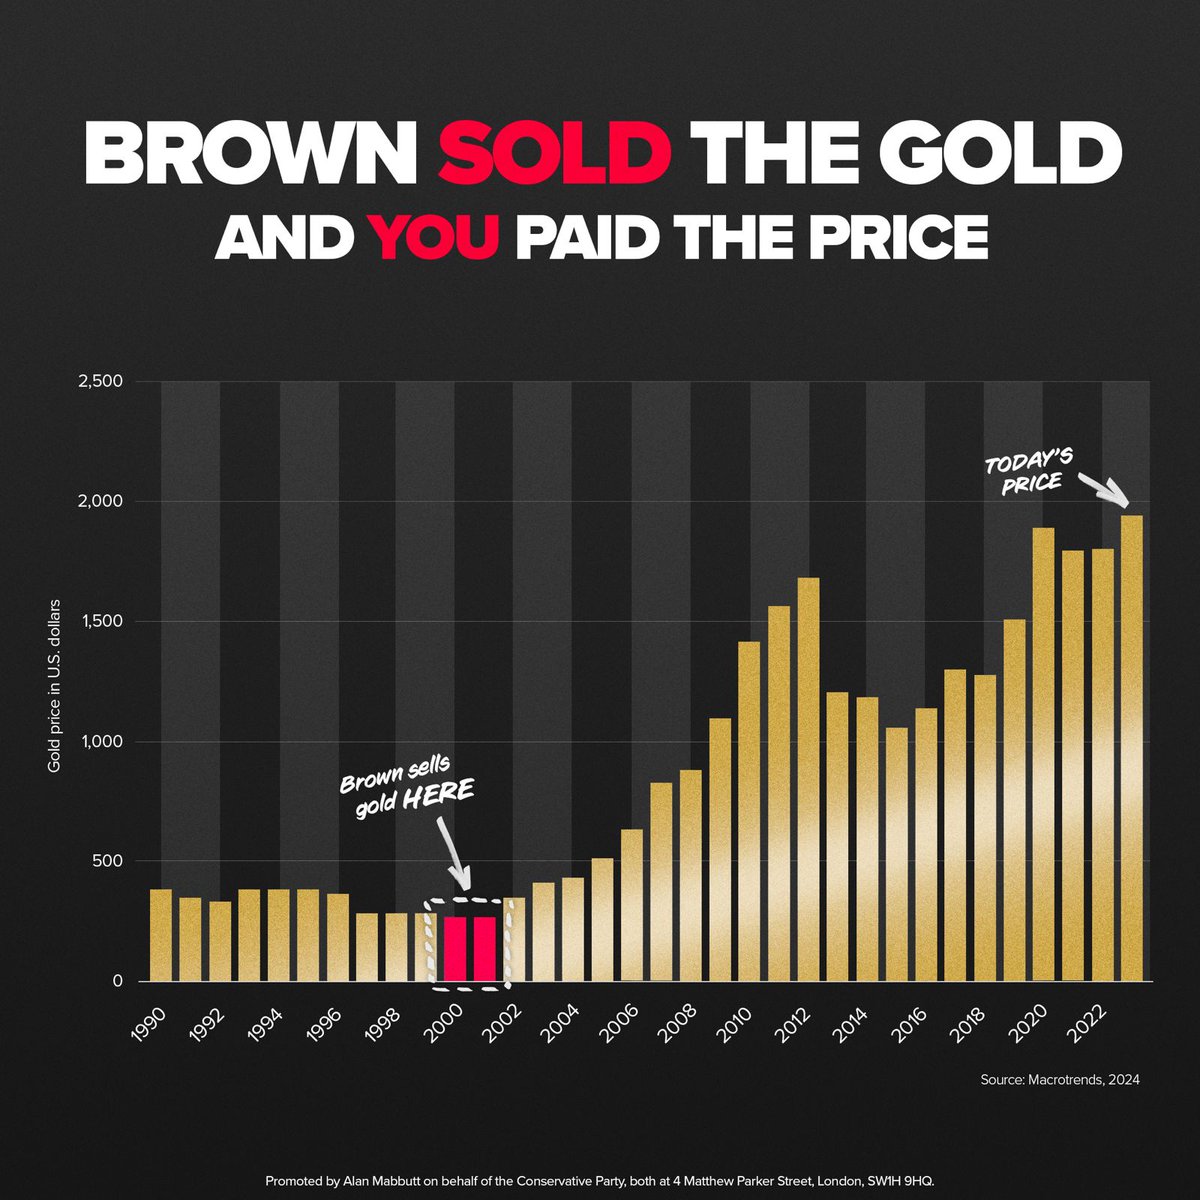 Brown sold the gold. He raided pensions. Then left a note confirming ‘there is no money’. Now he’s helping Keir Starmer do it all over again. #SameOldLabour🥀